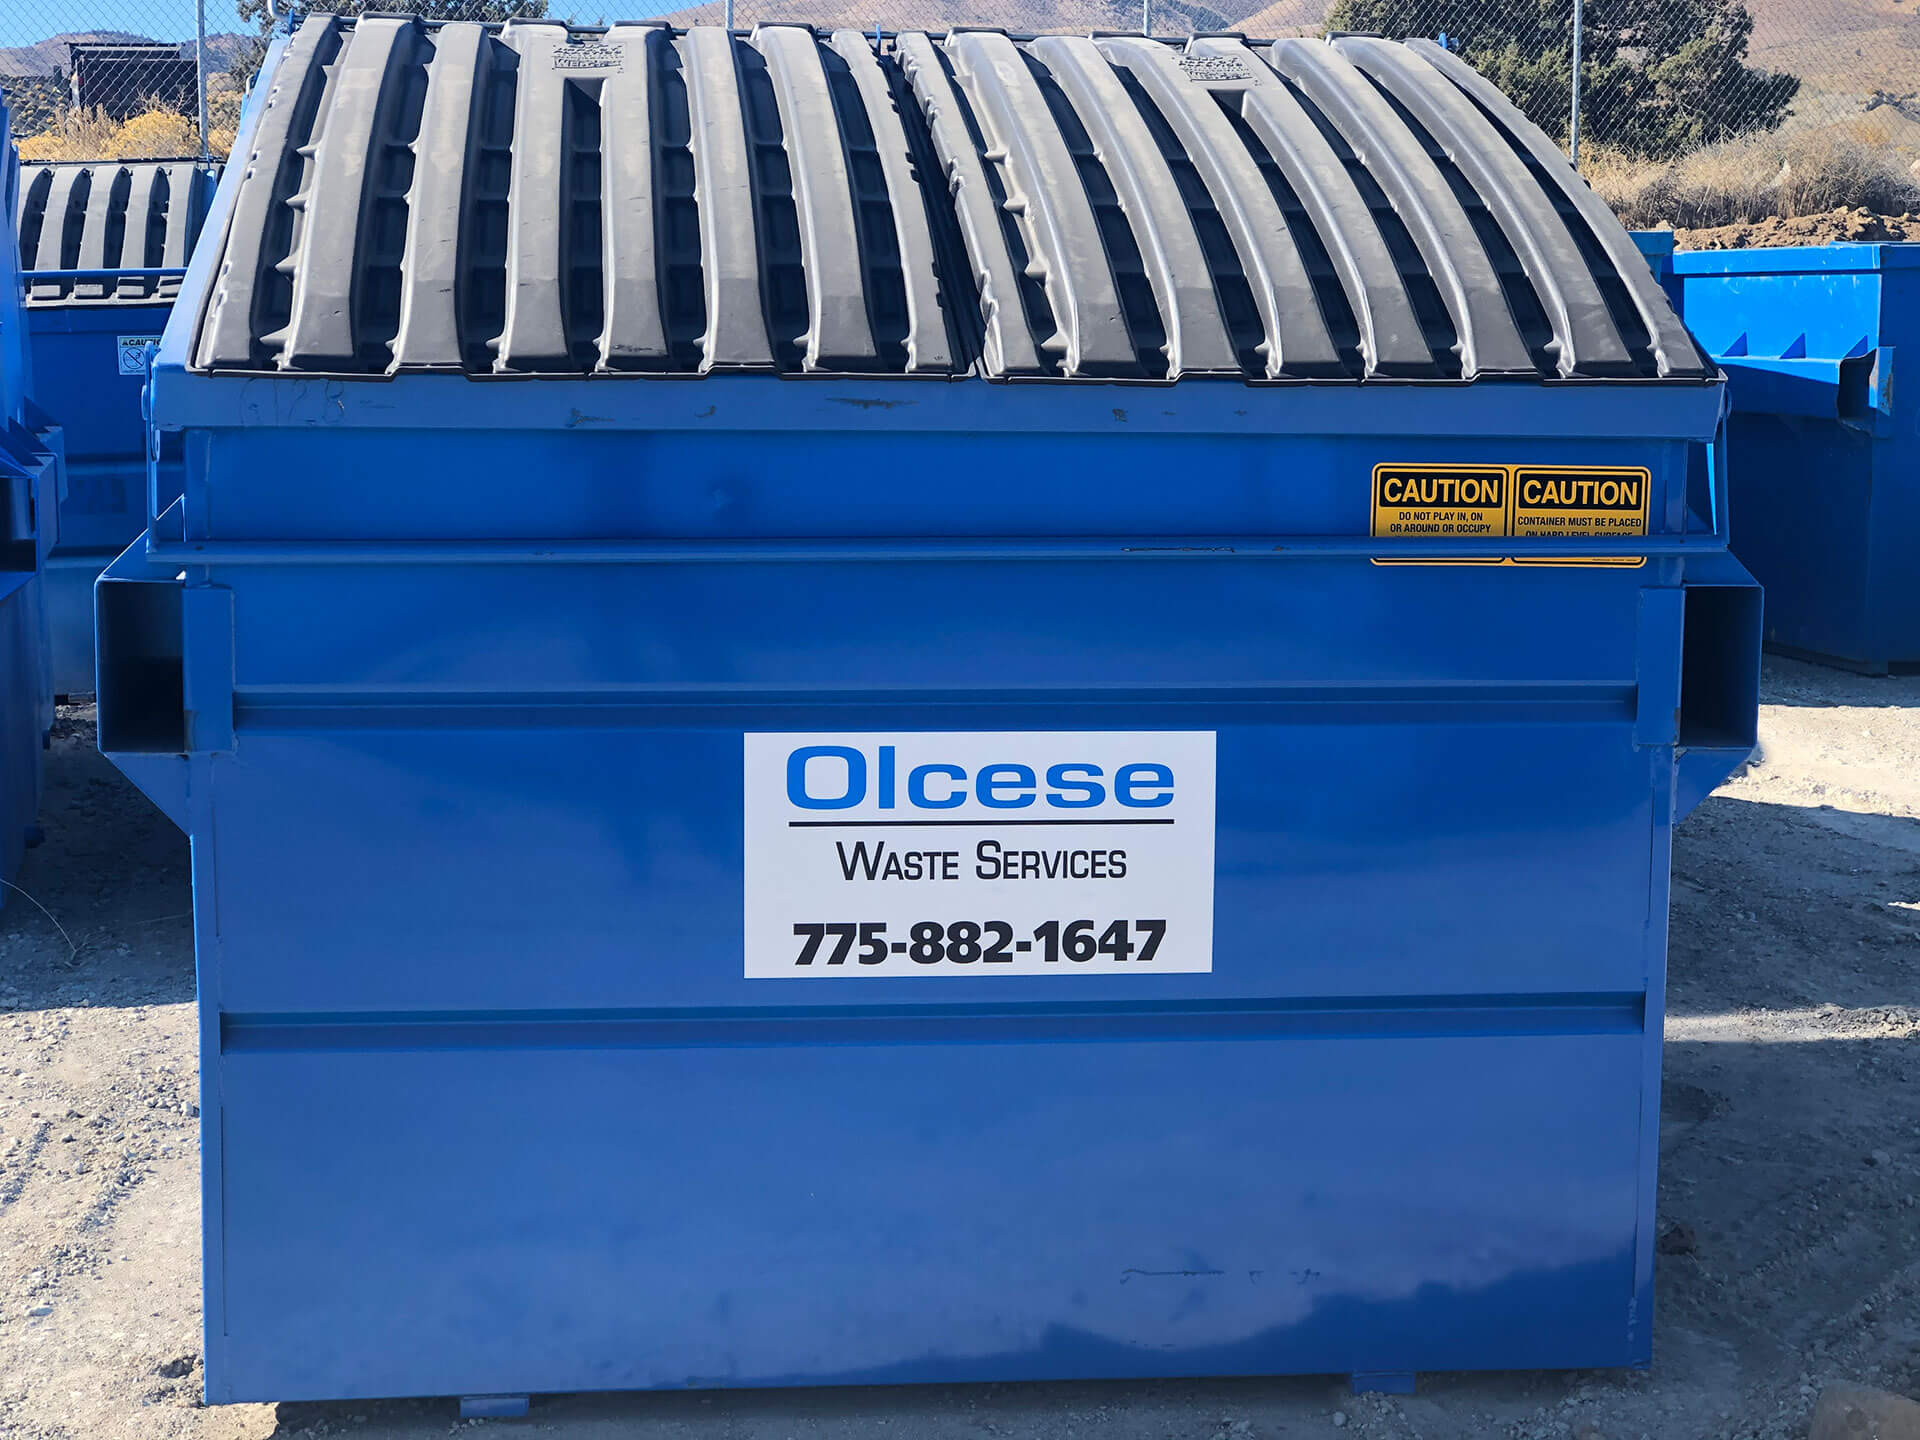 Olcese Services - 4 yard cart